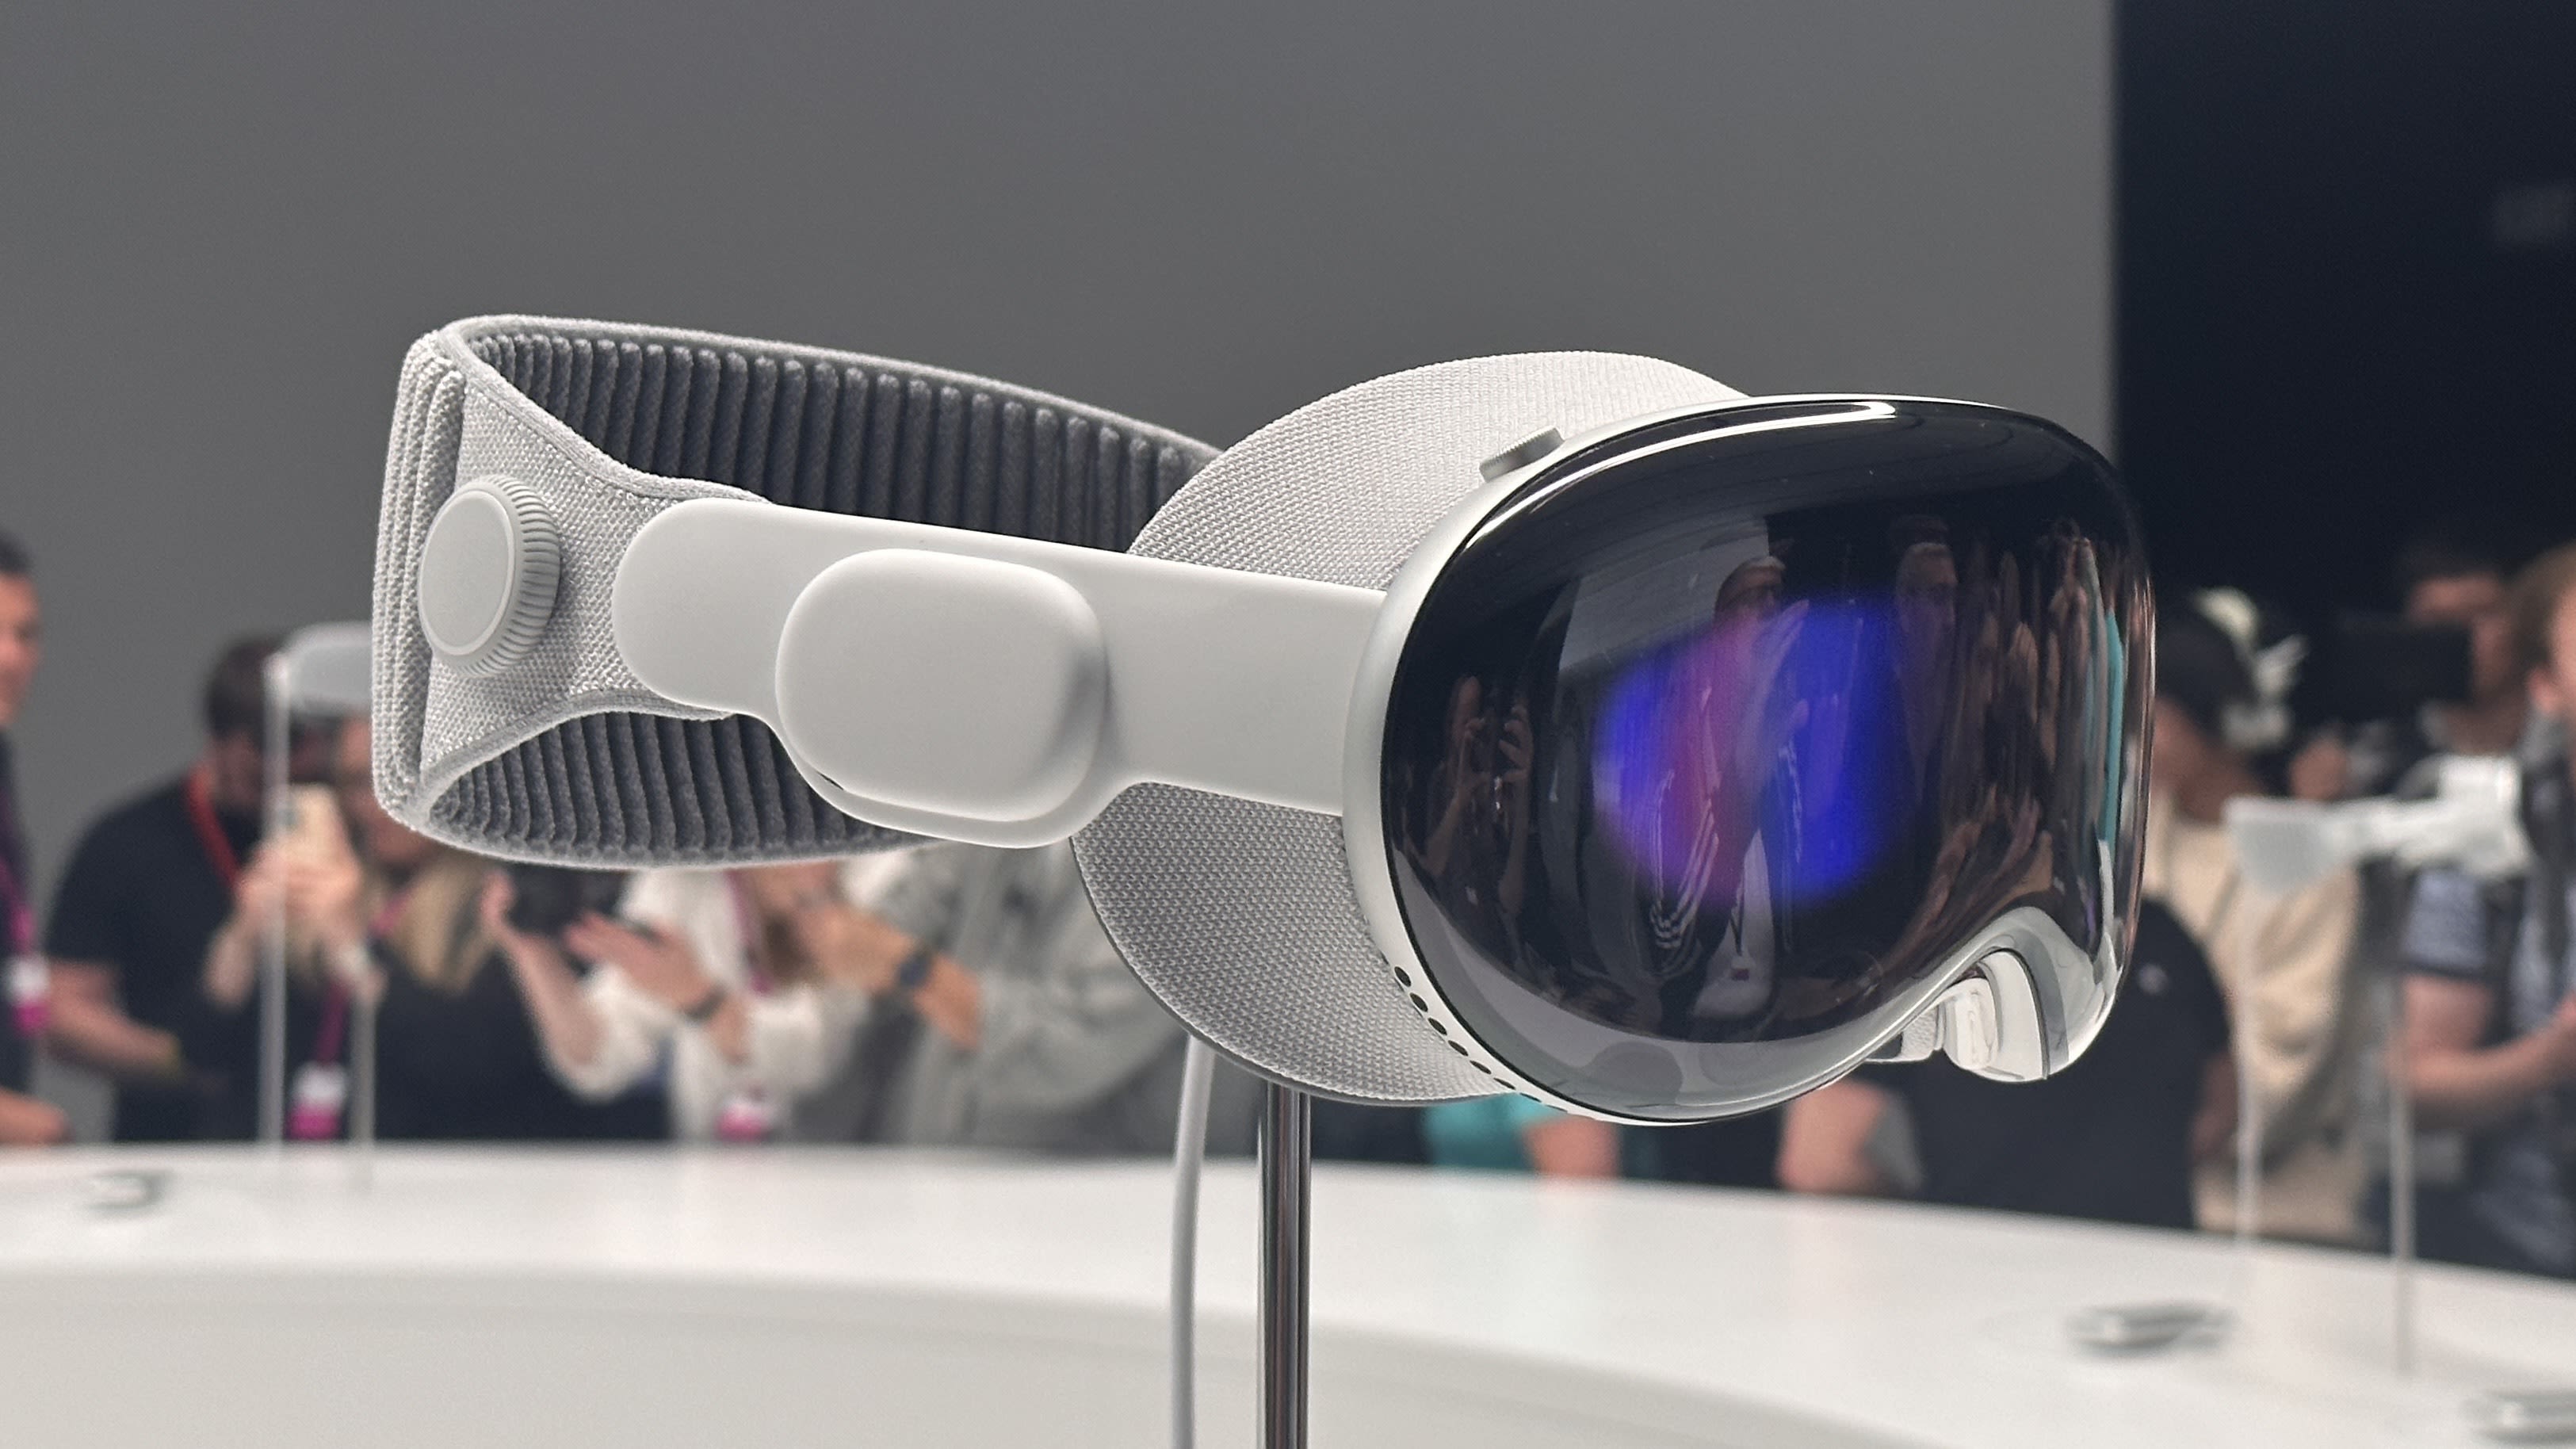 Buying Apple's Vision Pro headset could require an appointment and a face  scan - The Verge